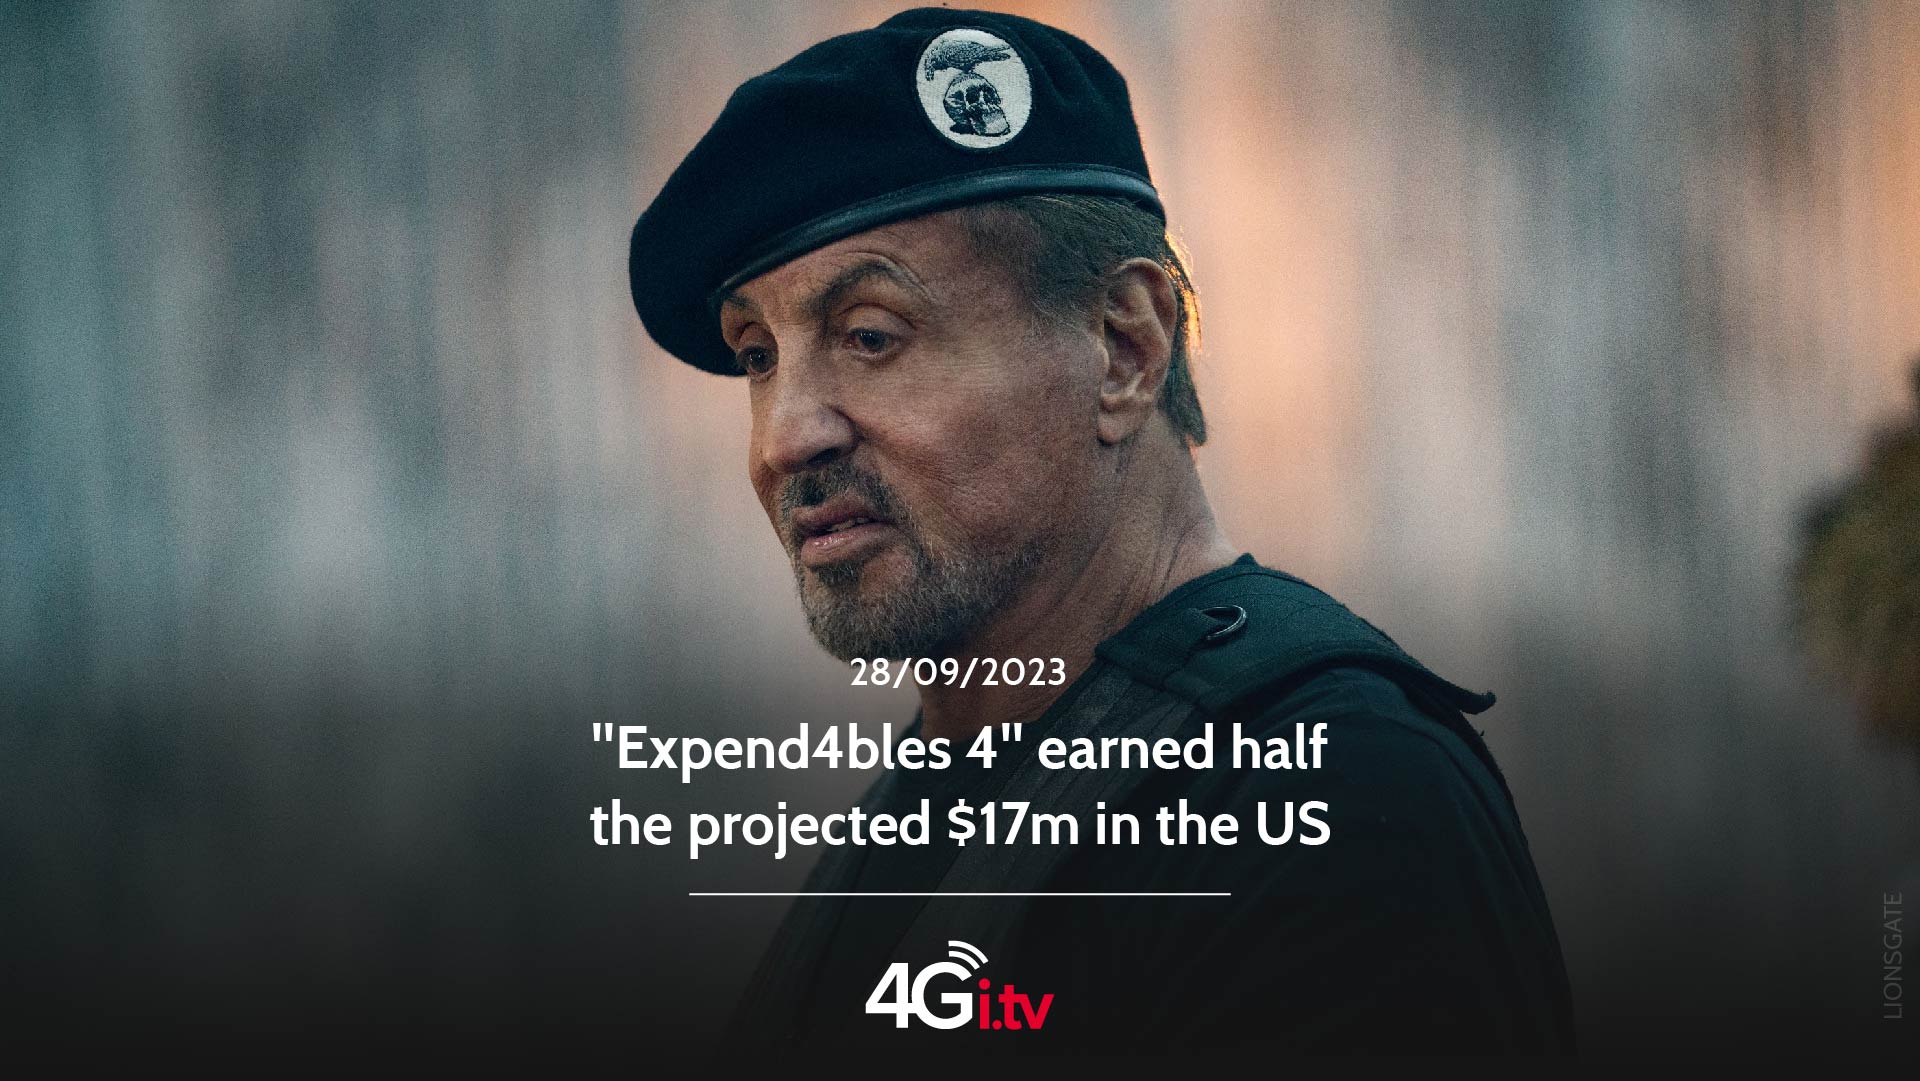 Lesen Sie mehr über den Artikel “Expend4bles 4” earned half the projected $17m in the US